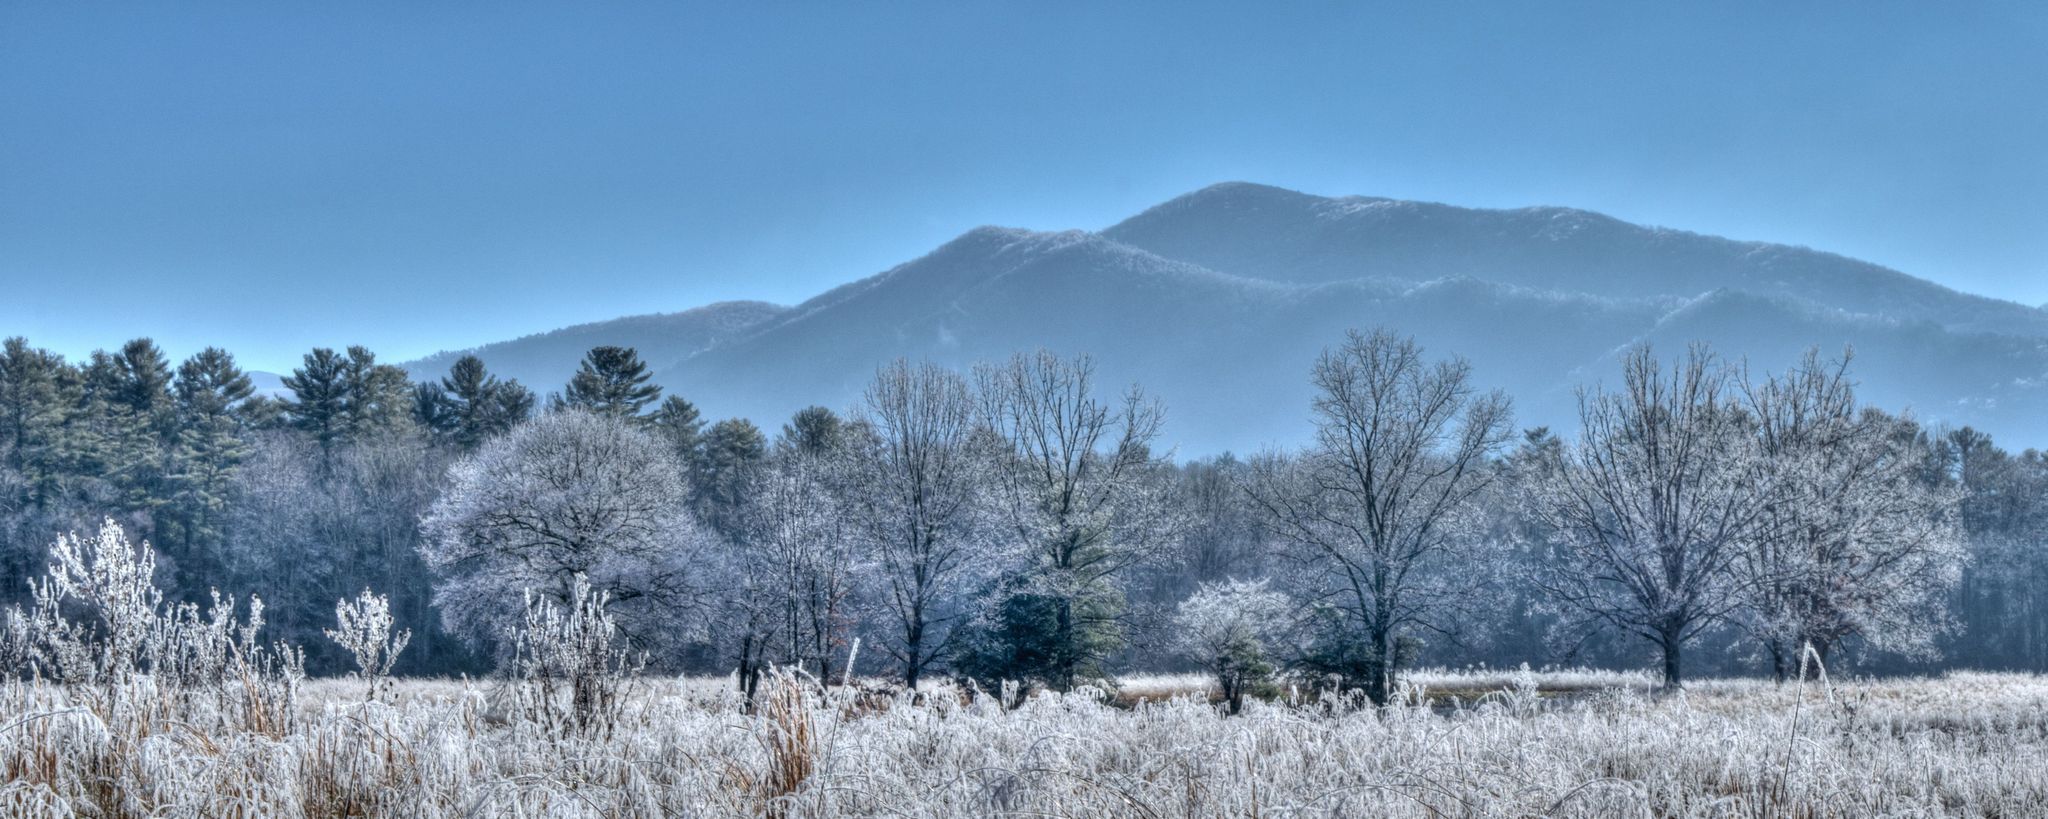 Wintertime brings a quiet beauty to the Great Smoky Mountains.